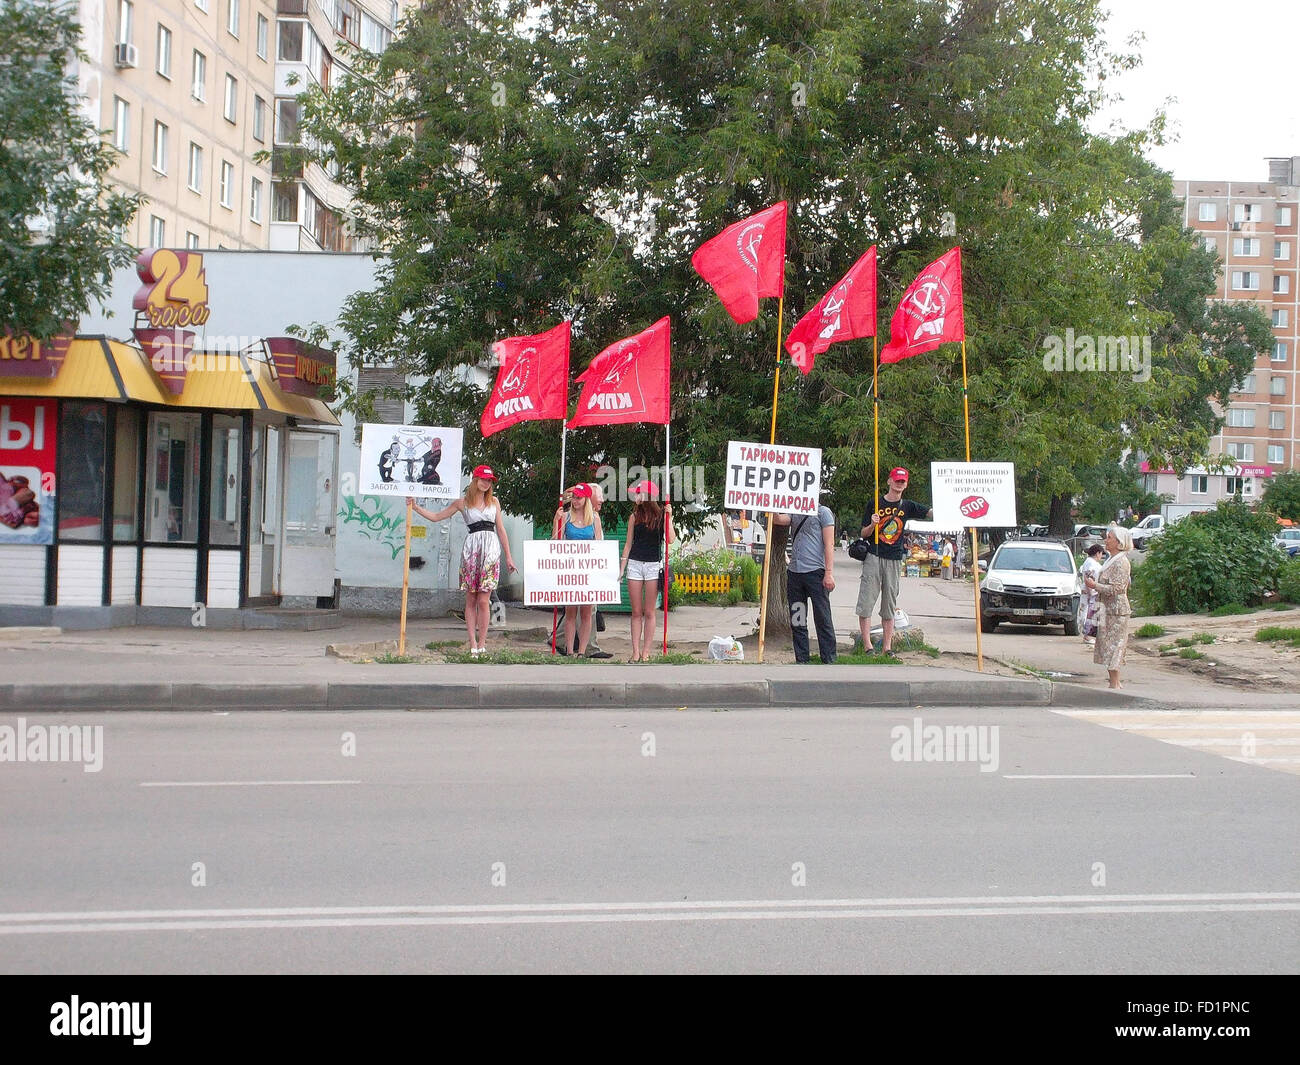 Orel, Russia - July 29, 2015: People at the meeting (rally) against the government and its policies Stock Photo